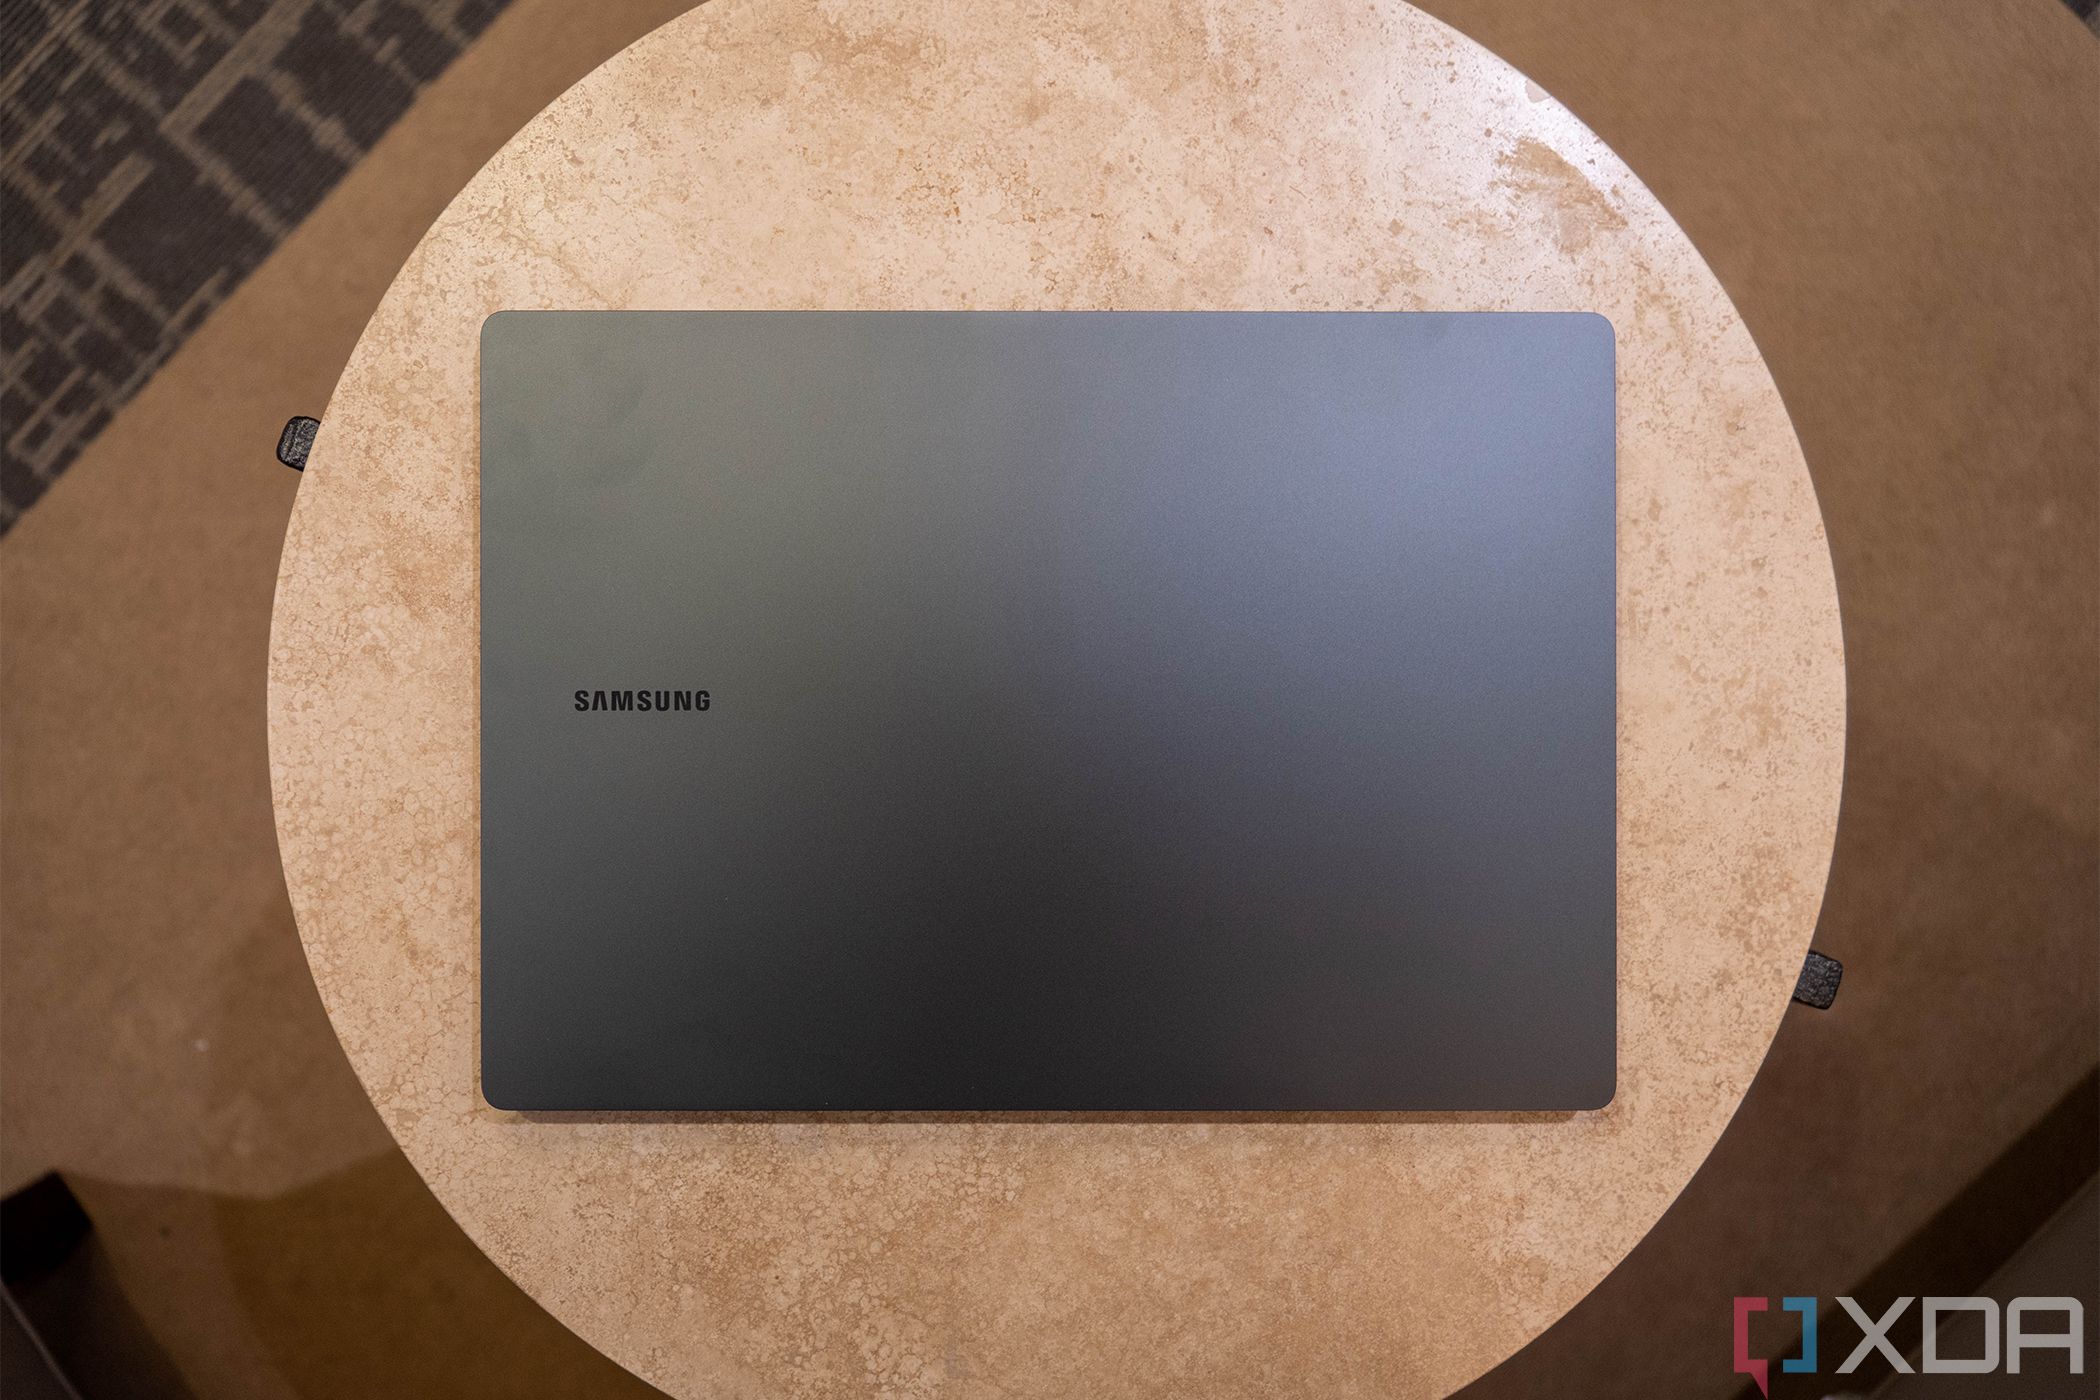 Top down view of gray laptop that says Samsung on it